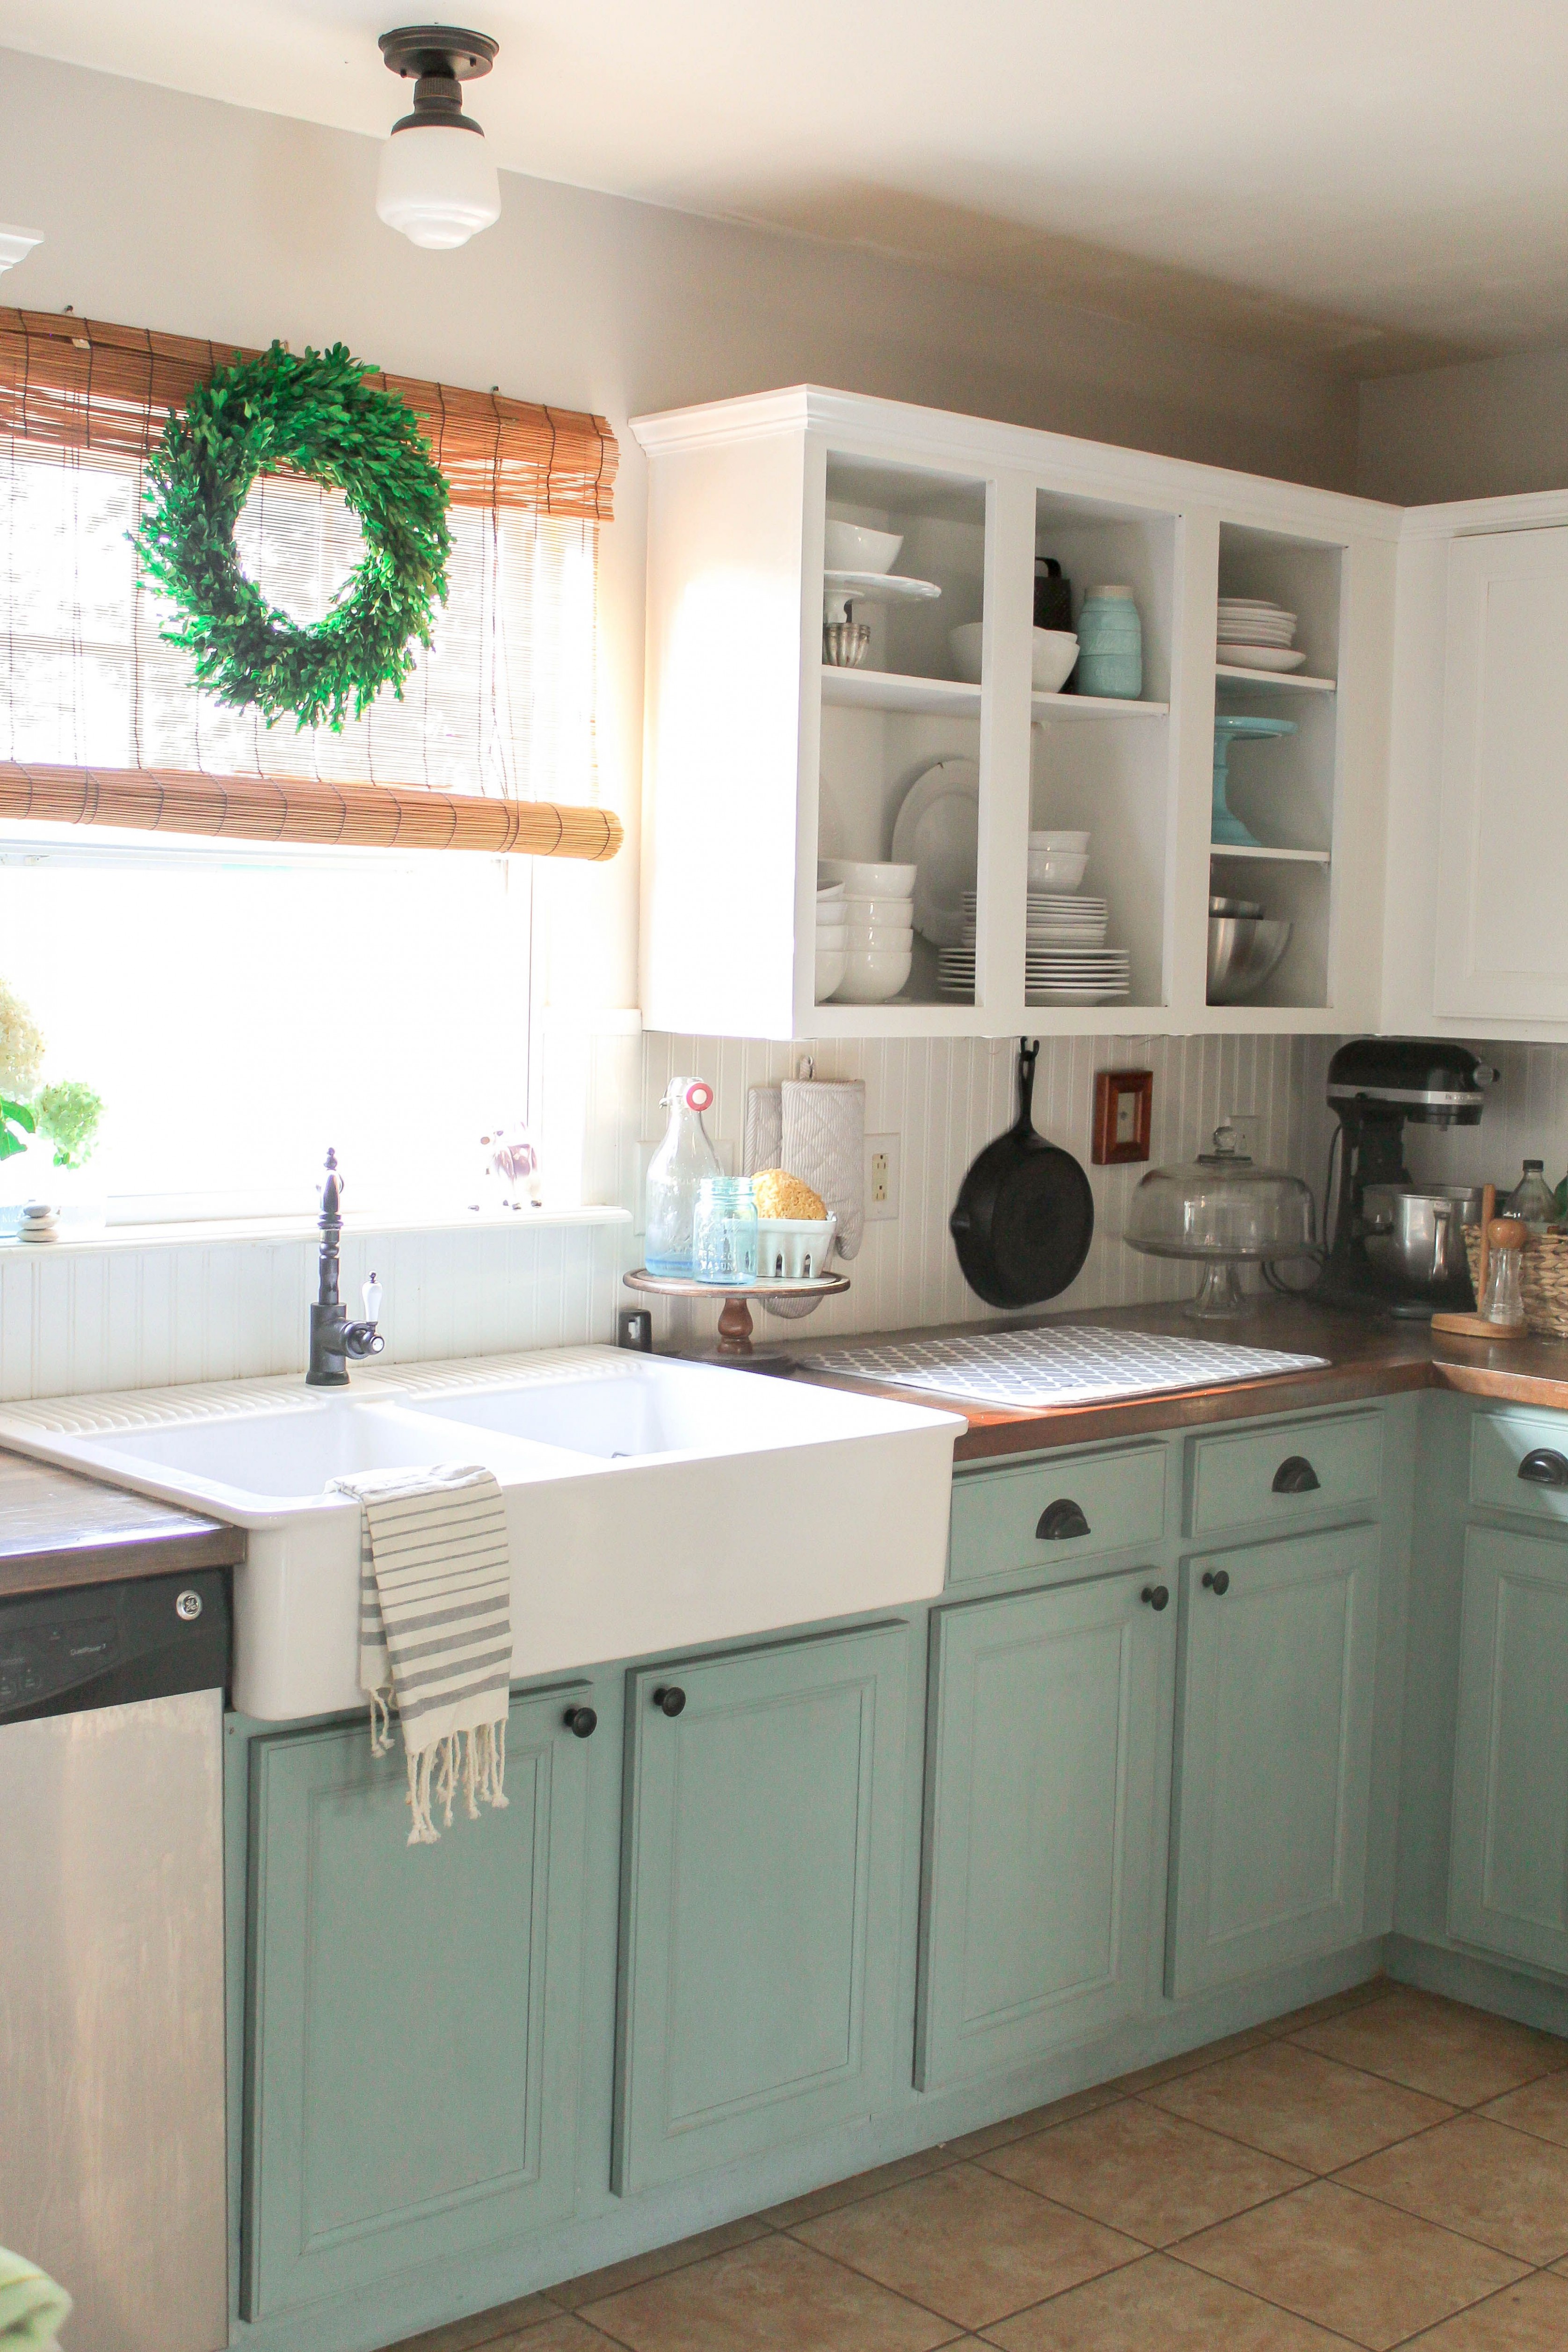 Chalk Painted Kitchen Cabinets: 9 Years Later | Chalk Paint ..